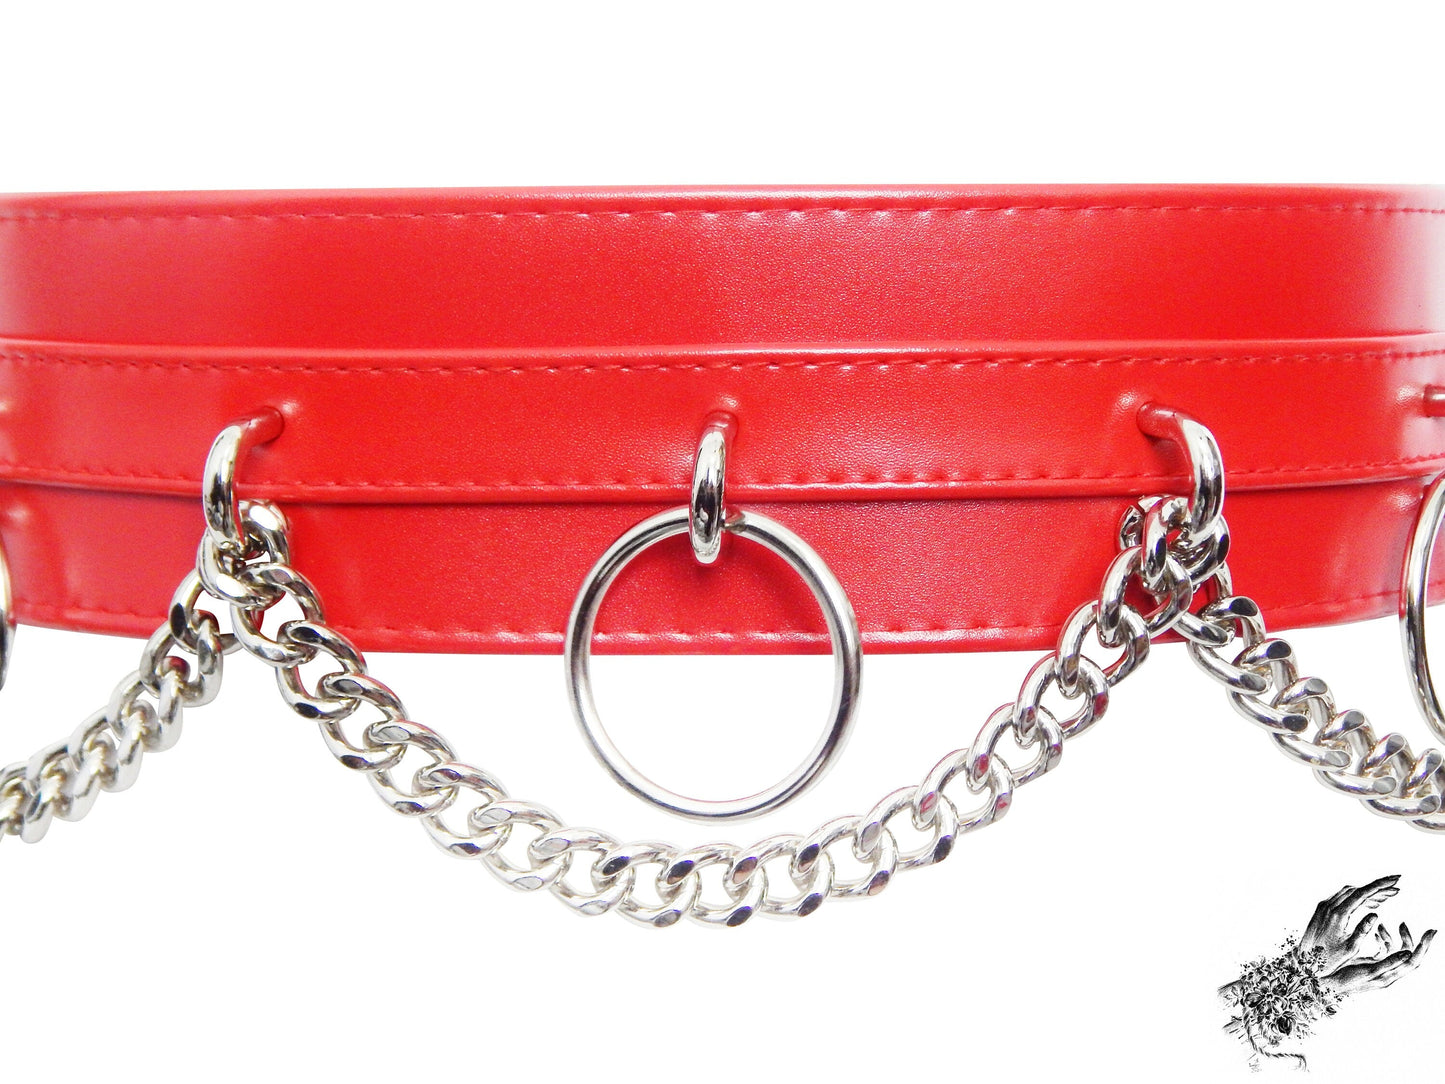 Red Vegan Leather O Ring and Chain Belt - SALE